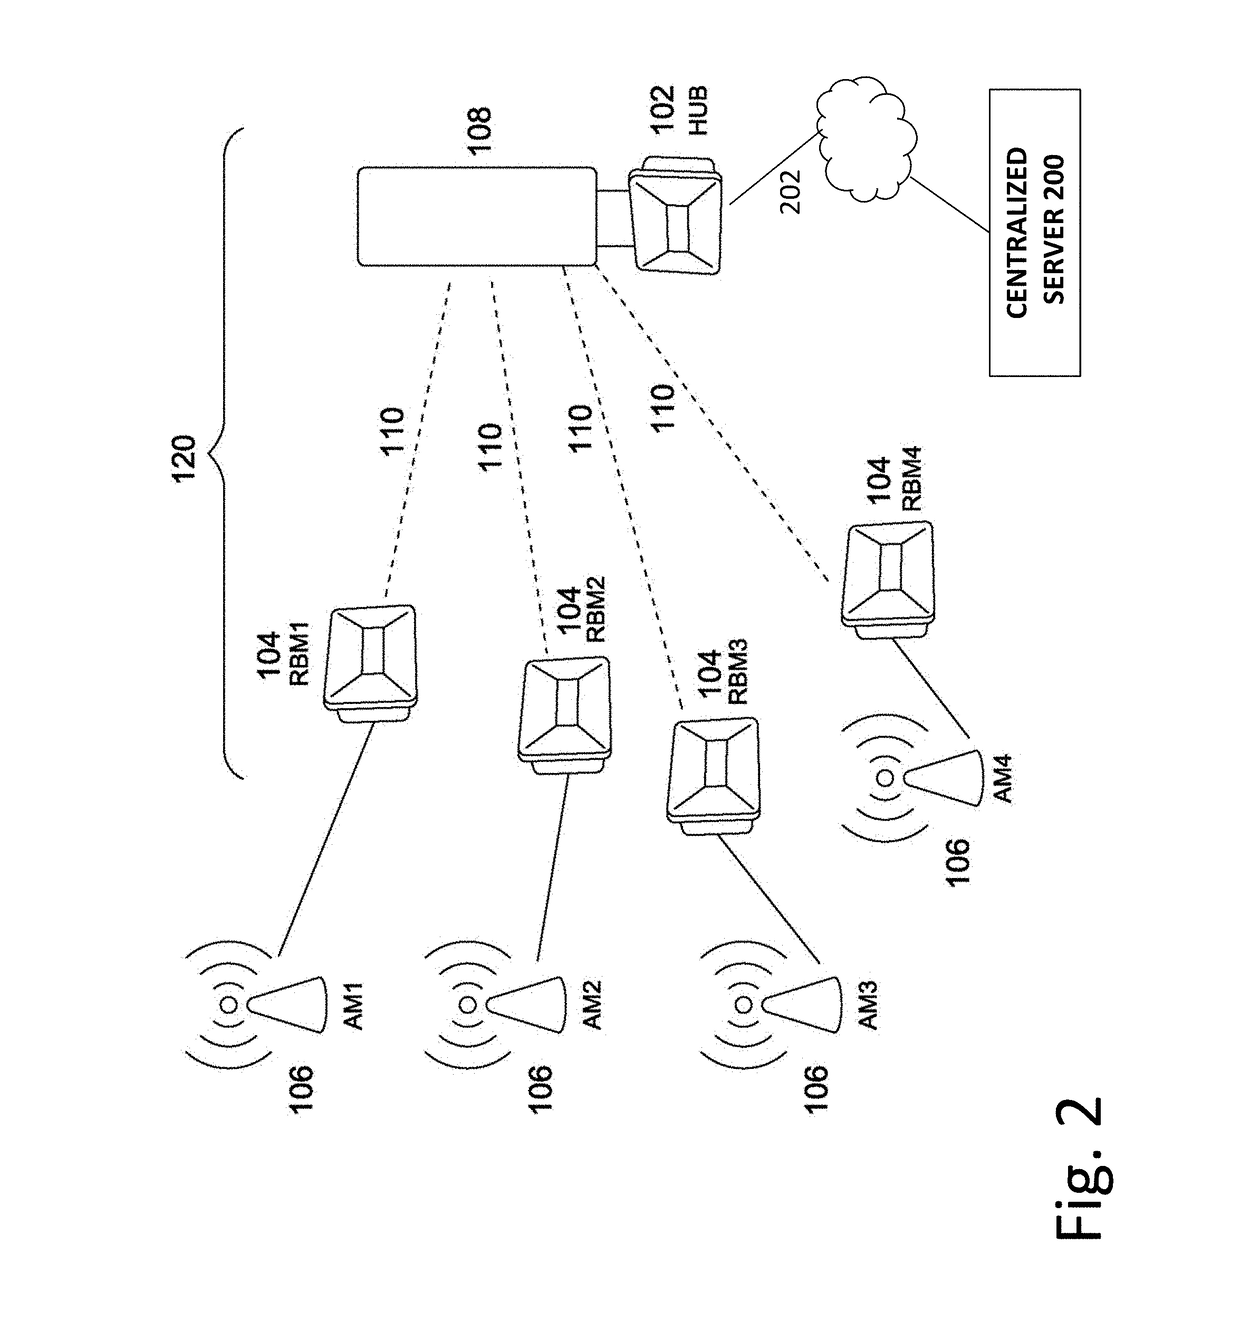 System and method of signalling for point-to-multipoint (PtMP) transmission in fixed wireless backhaul networks